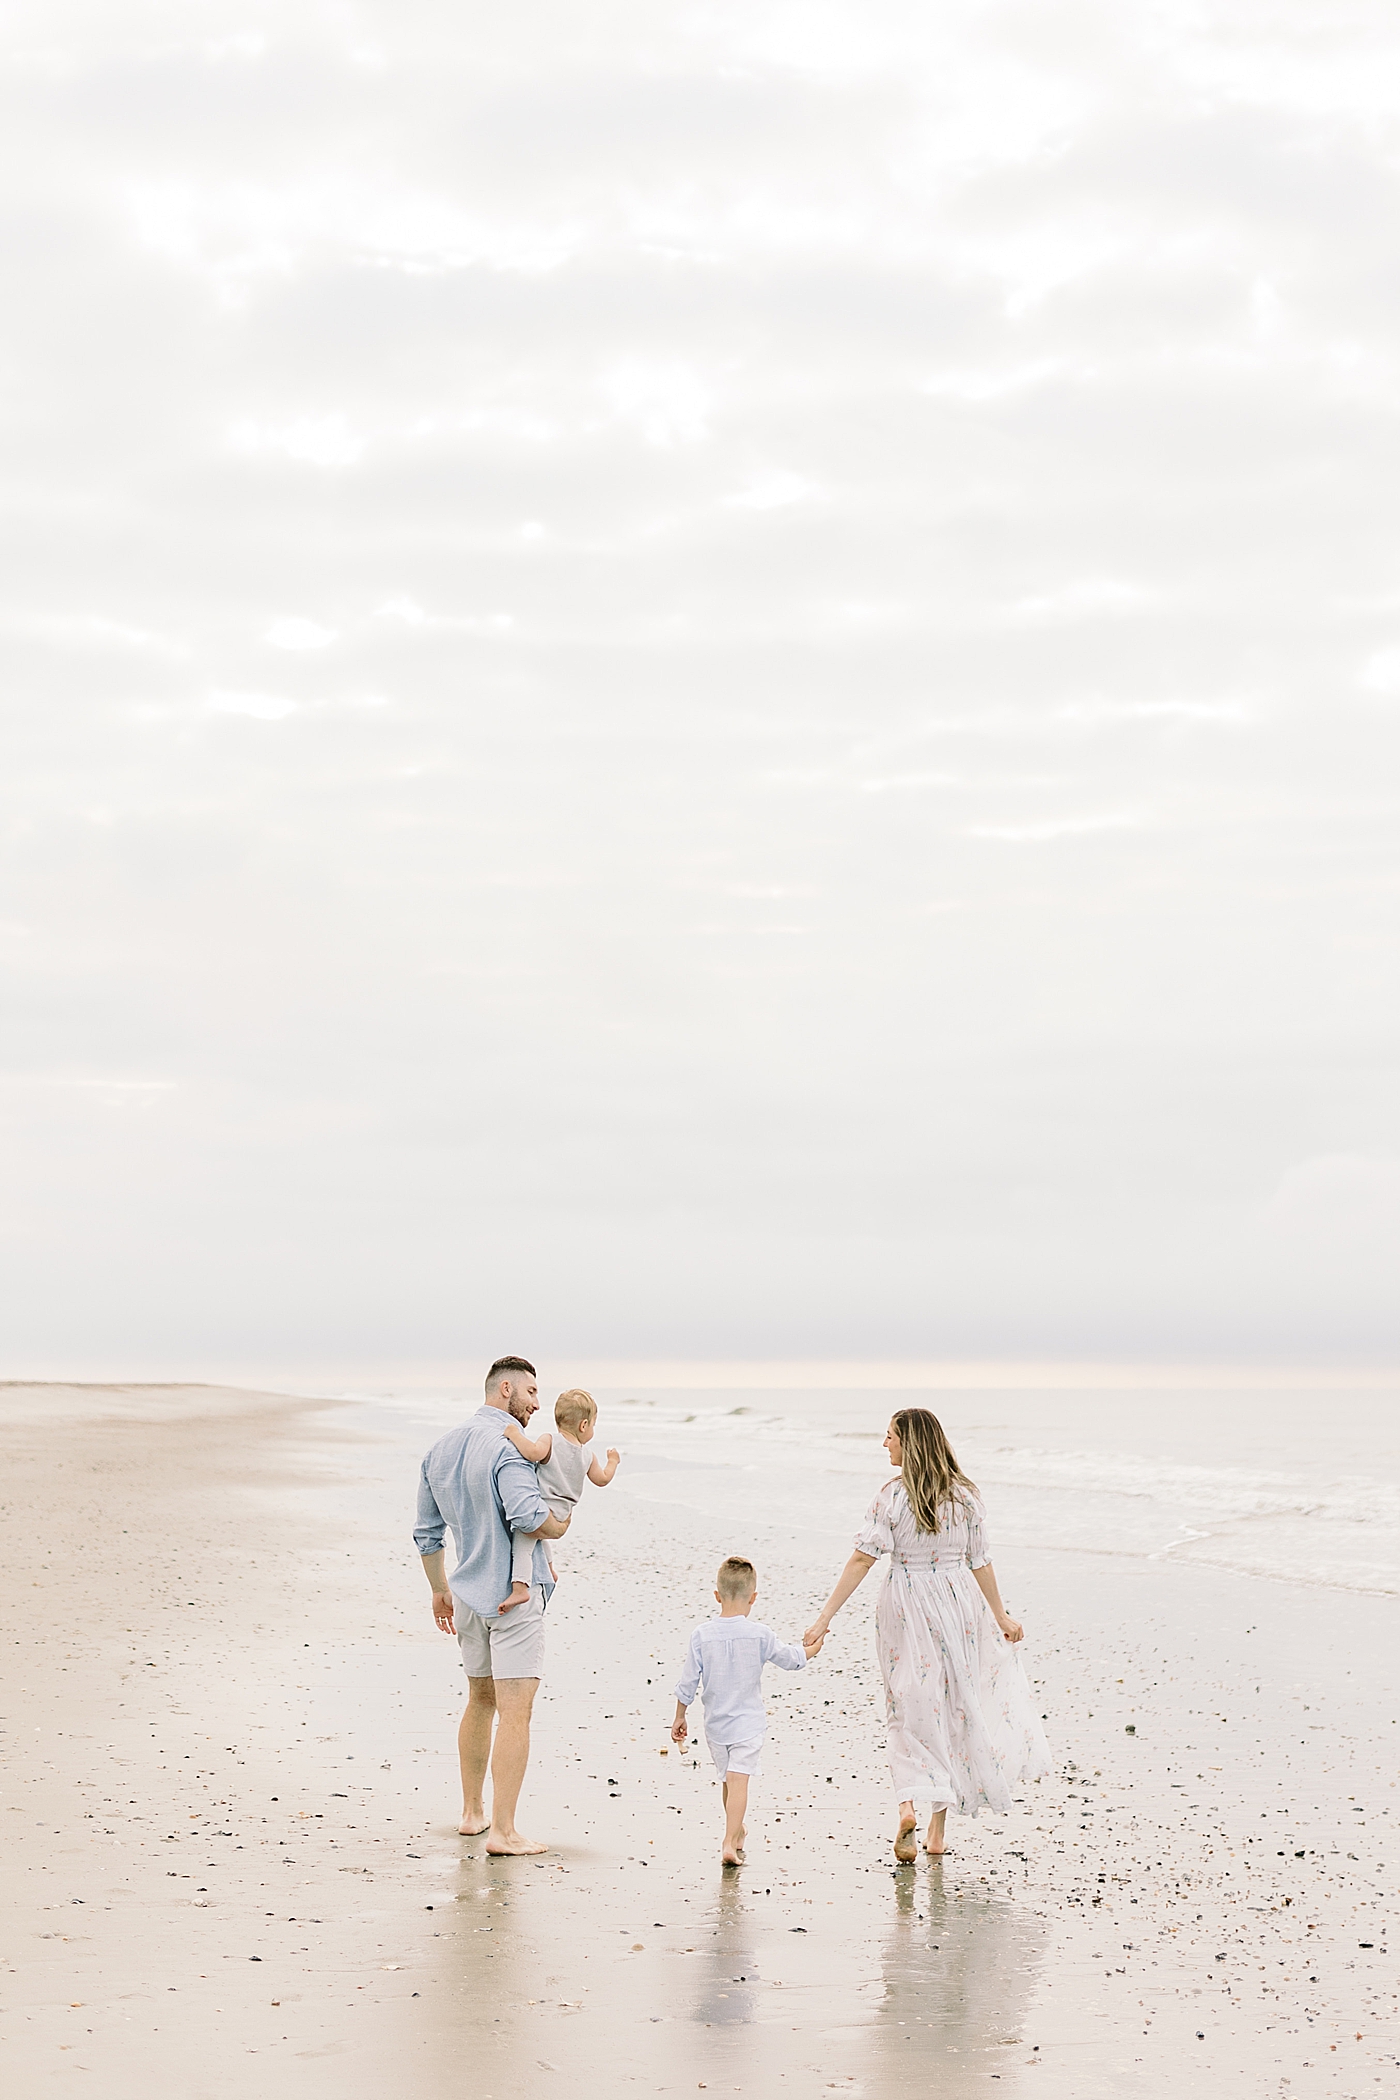 Family walking together on the beach | Image by Caitlyn Motycka